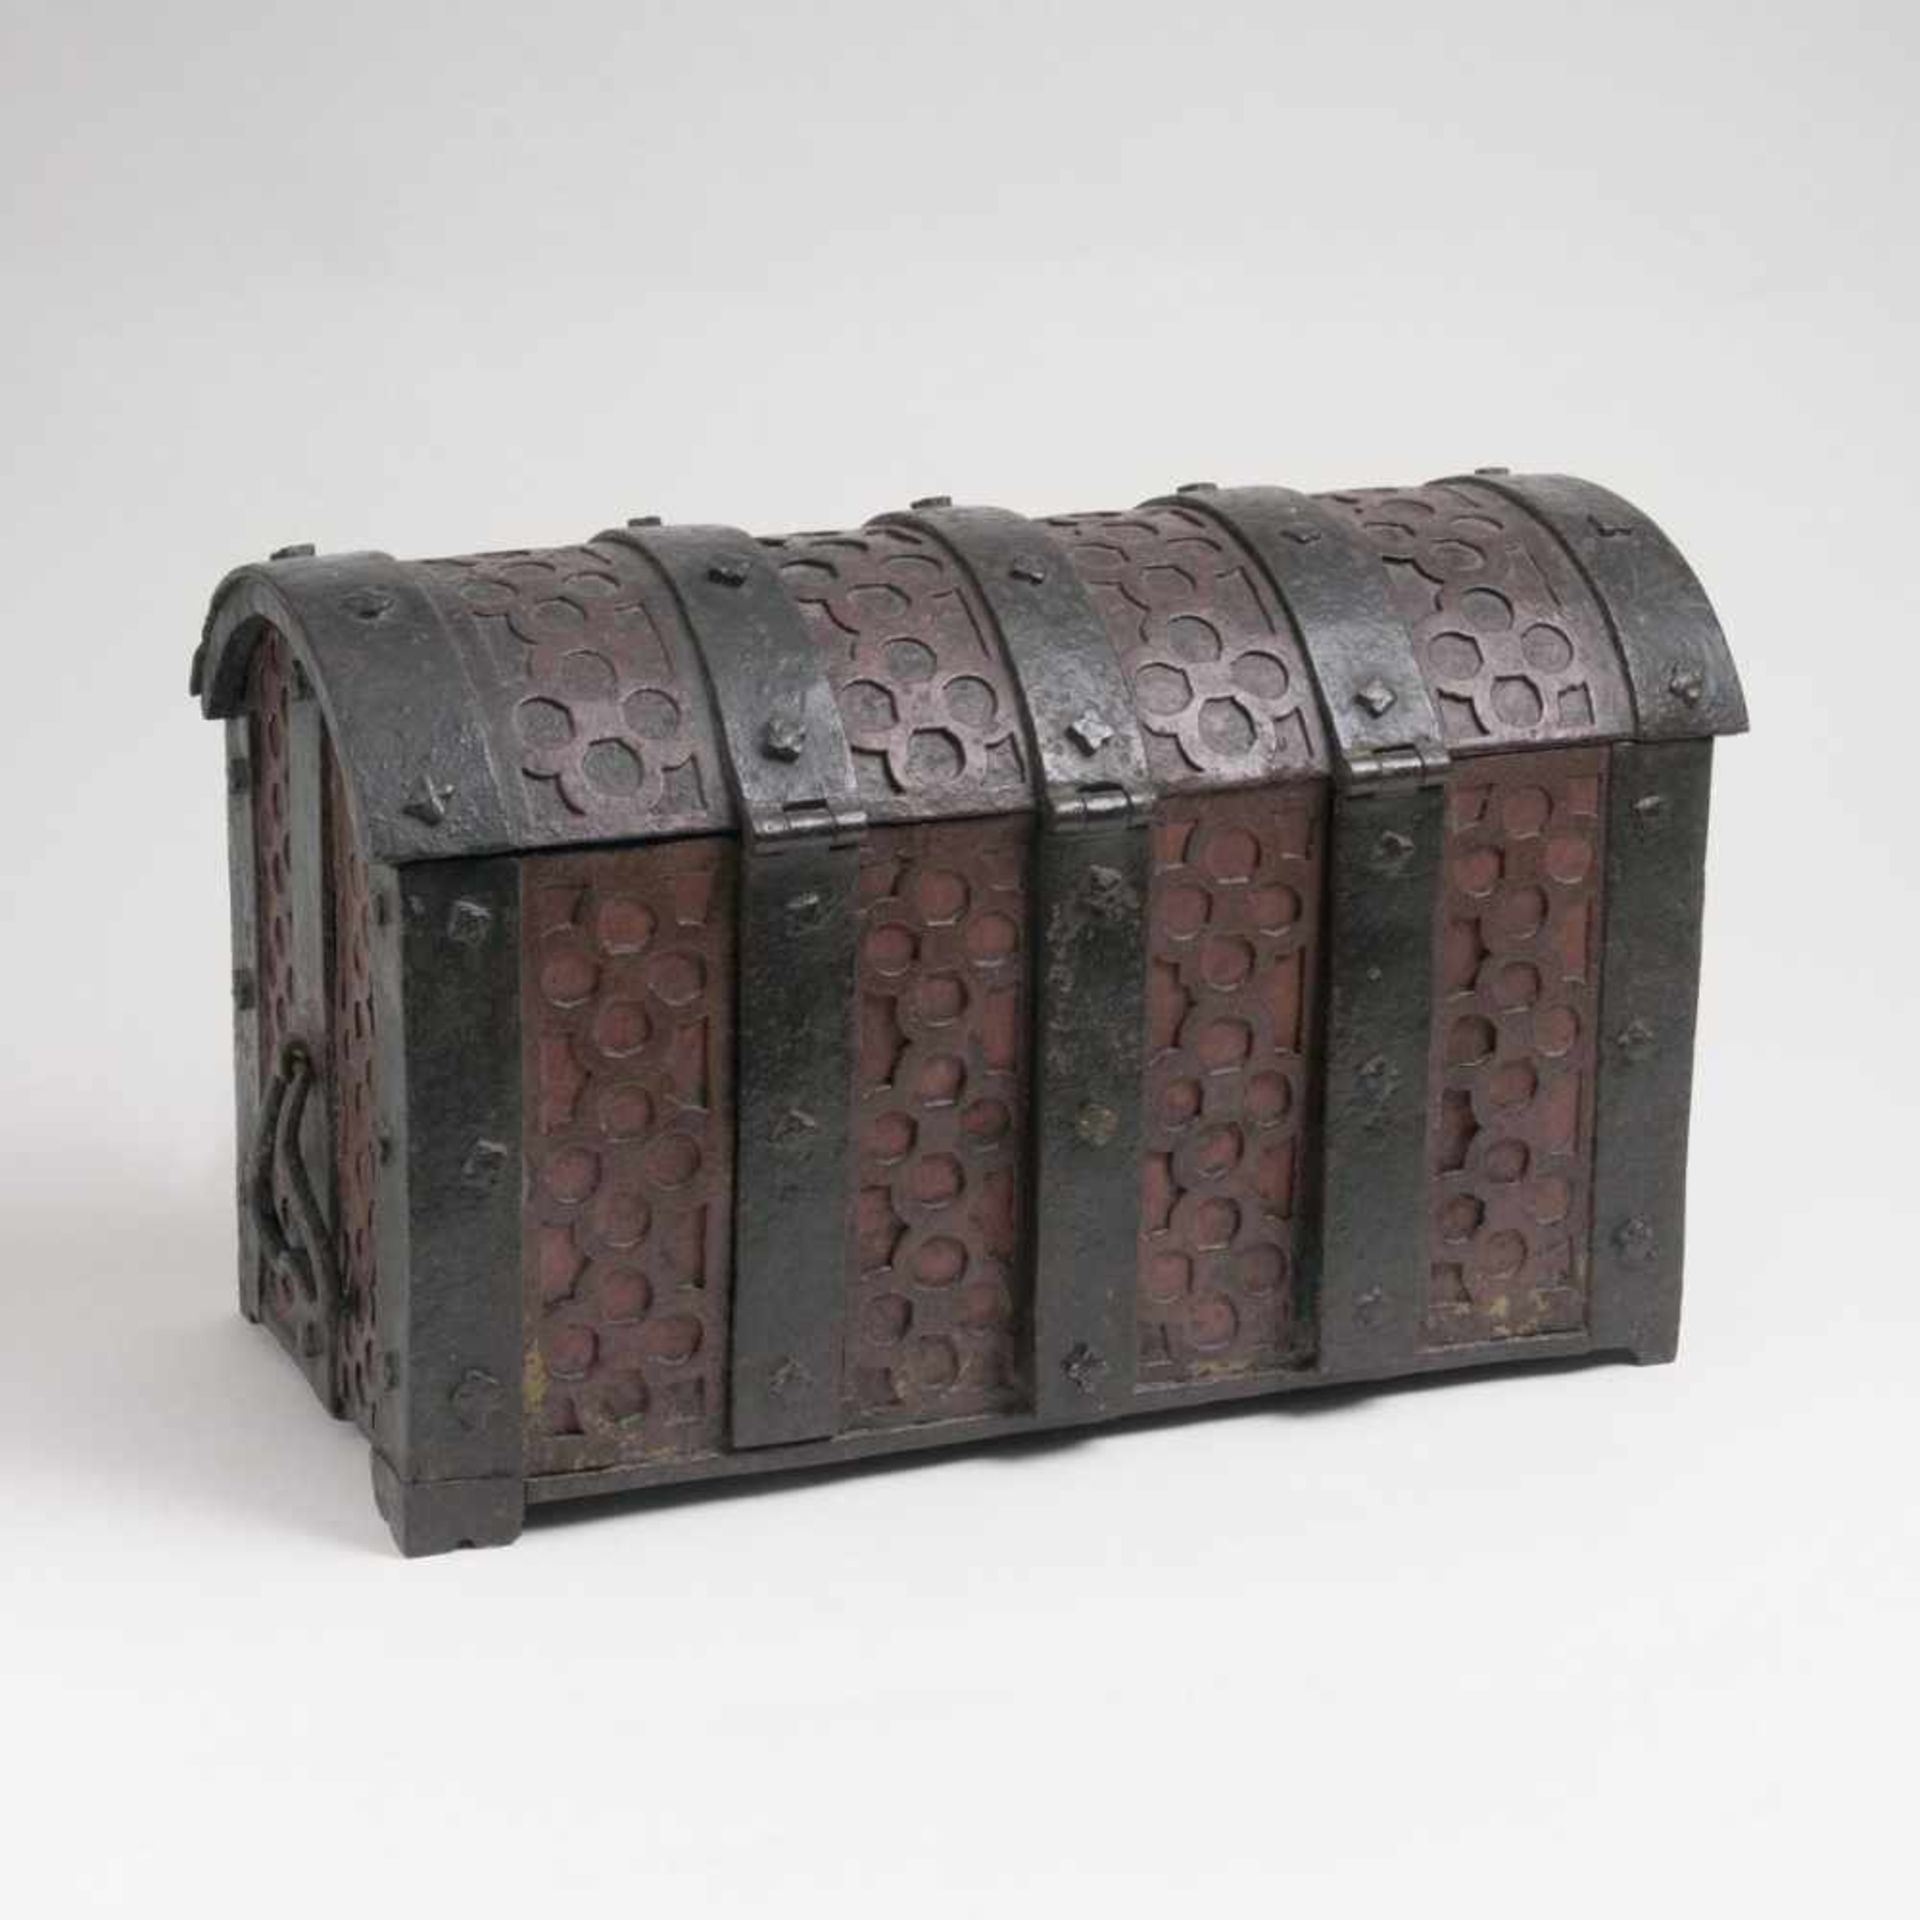 A Gothic Iron CascetFrance/Spain, 16th cent. Wrought iron, partially with red painting.